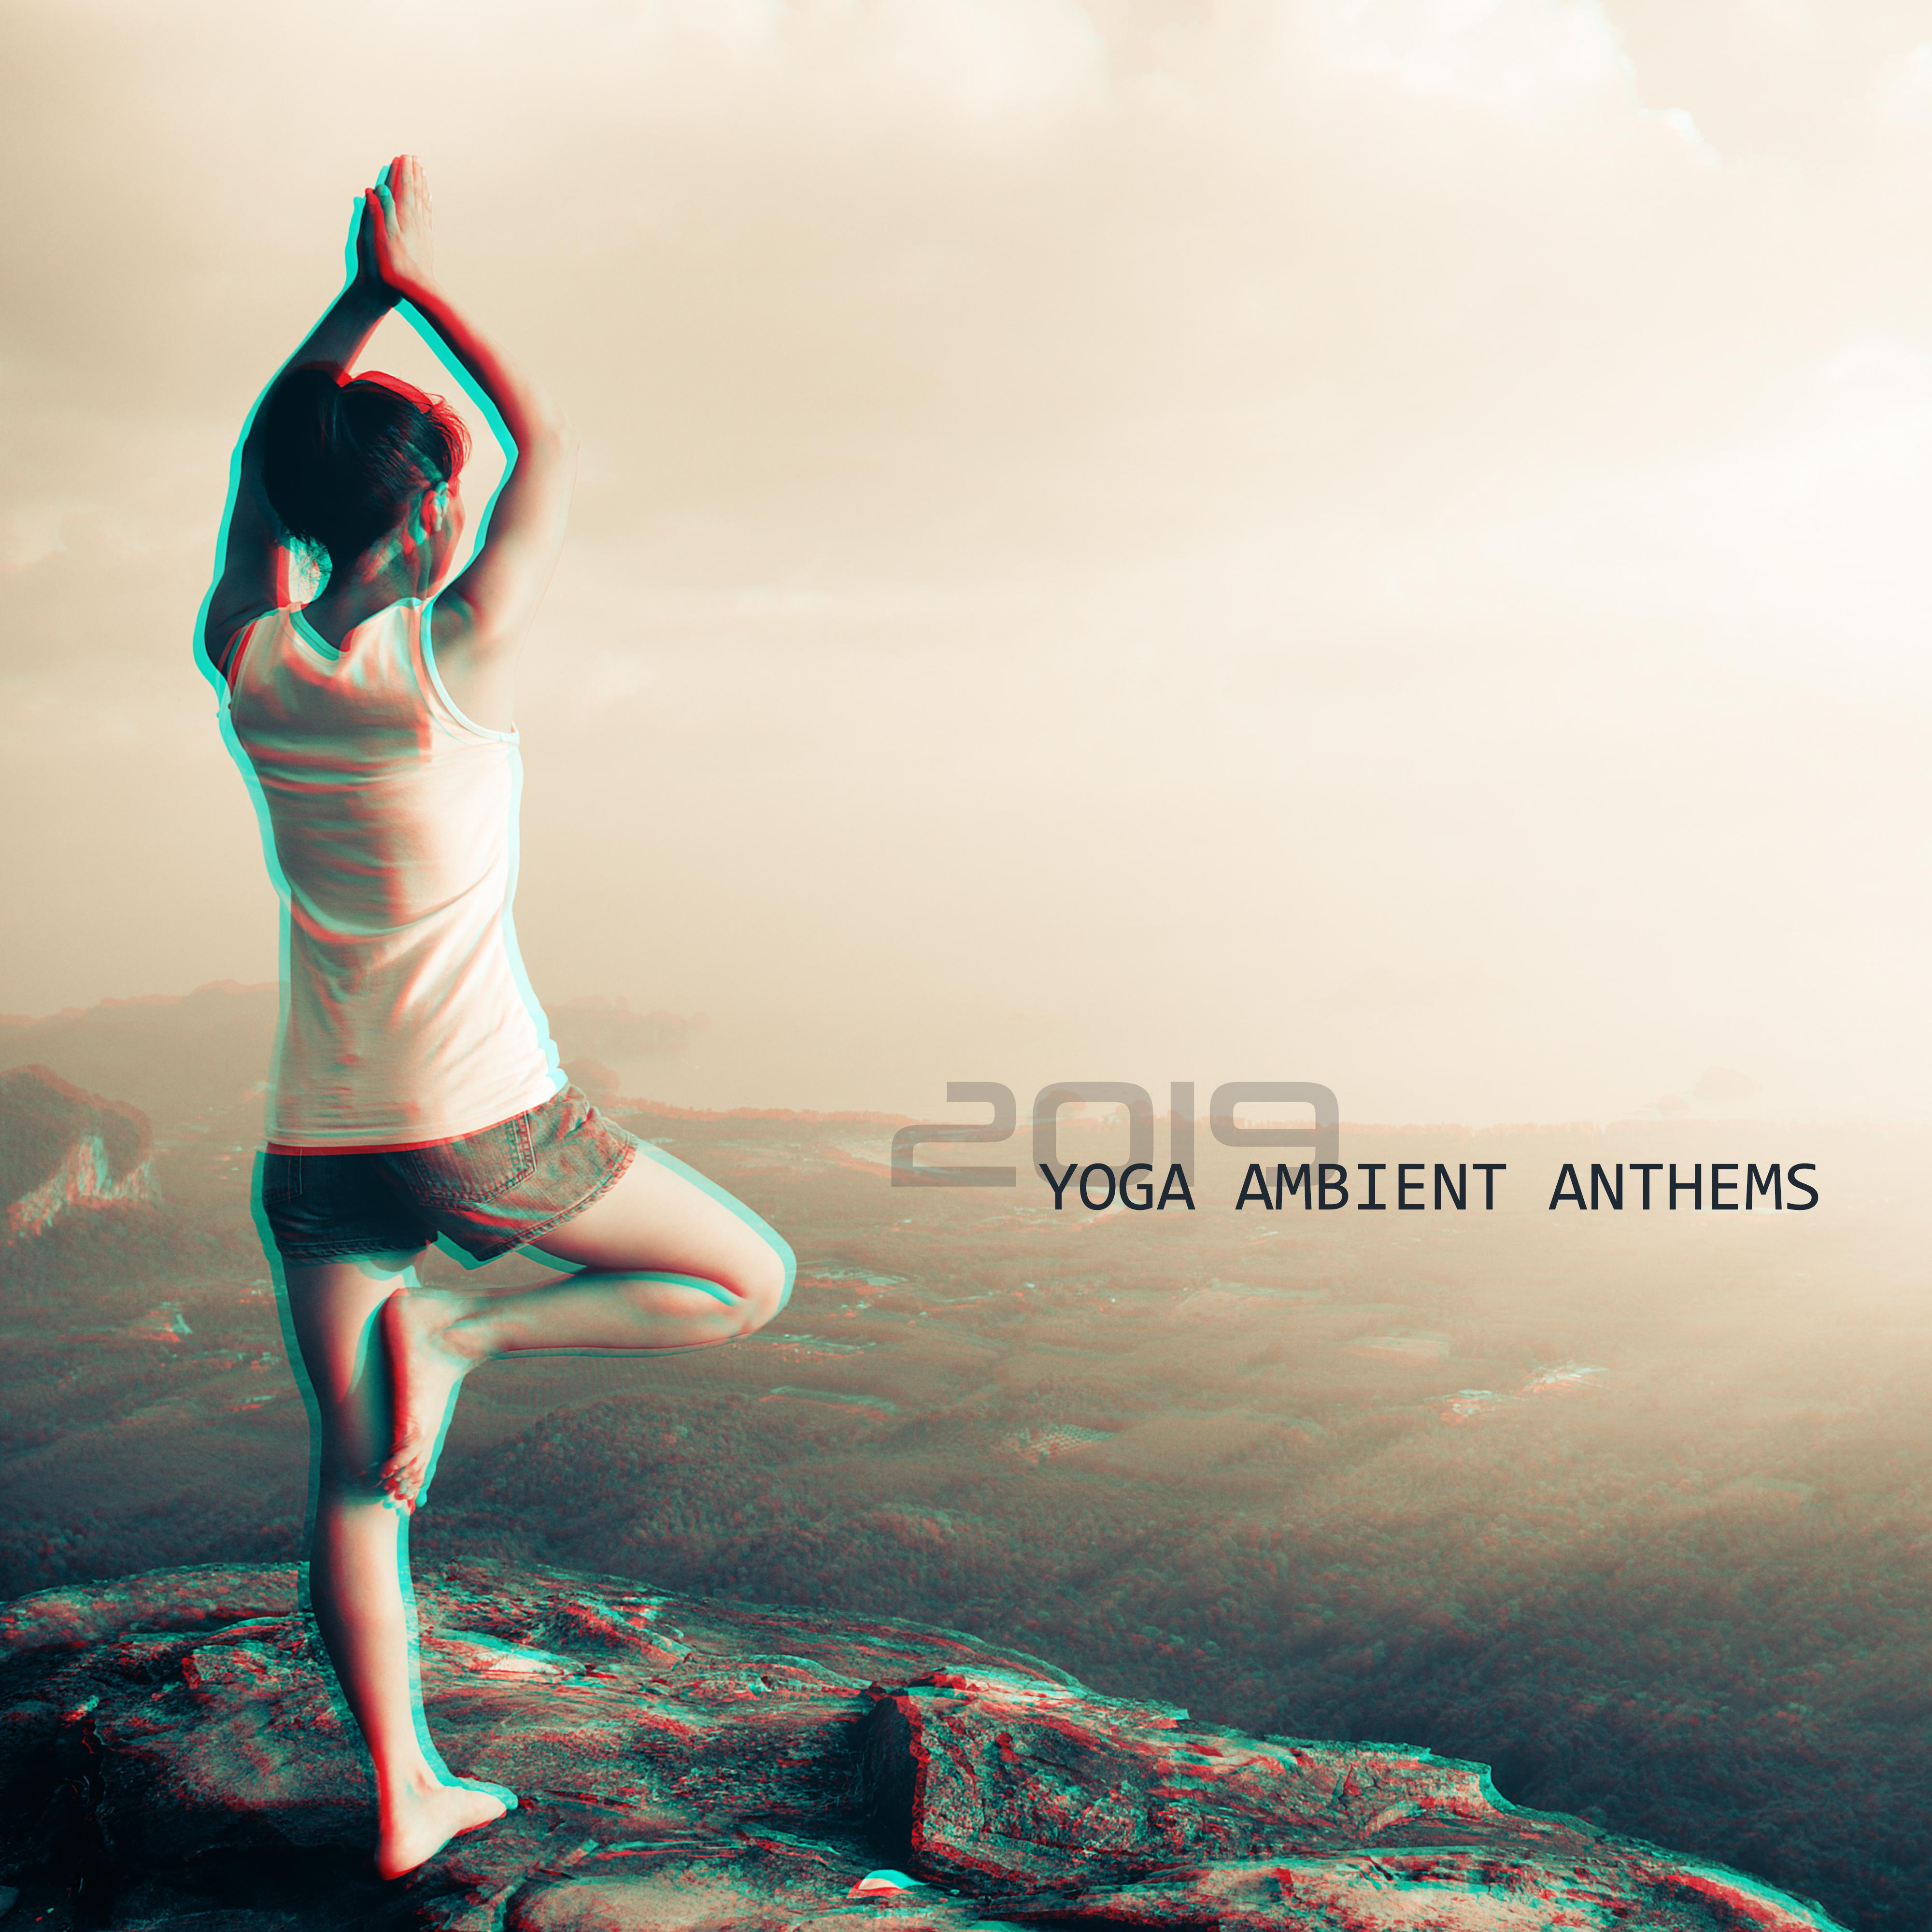 2019 Yoga Ambient Anthems